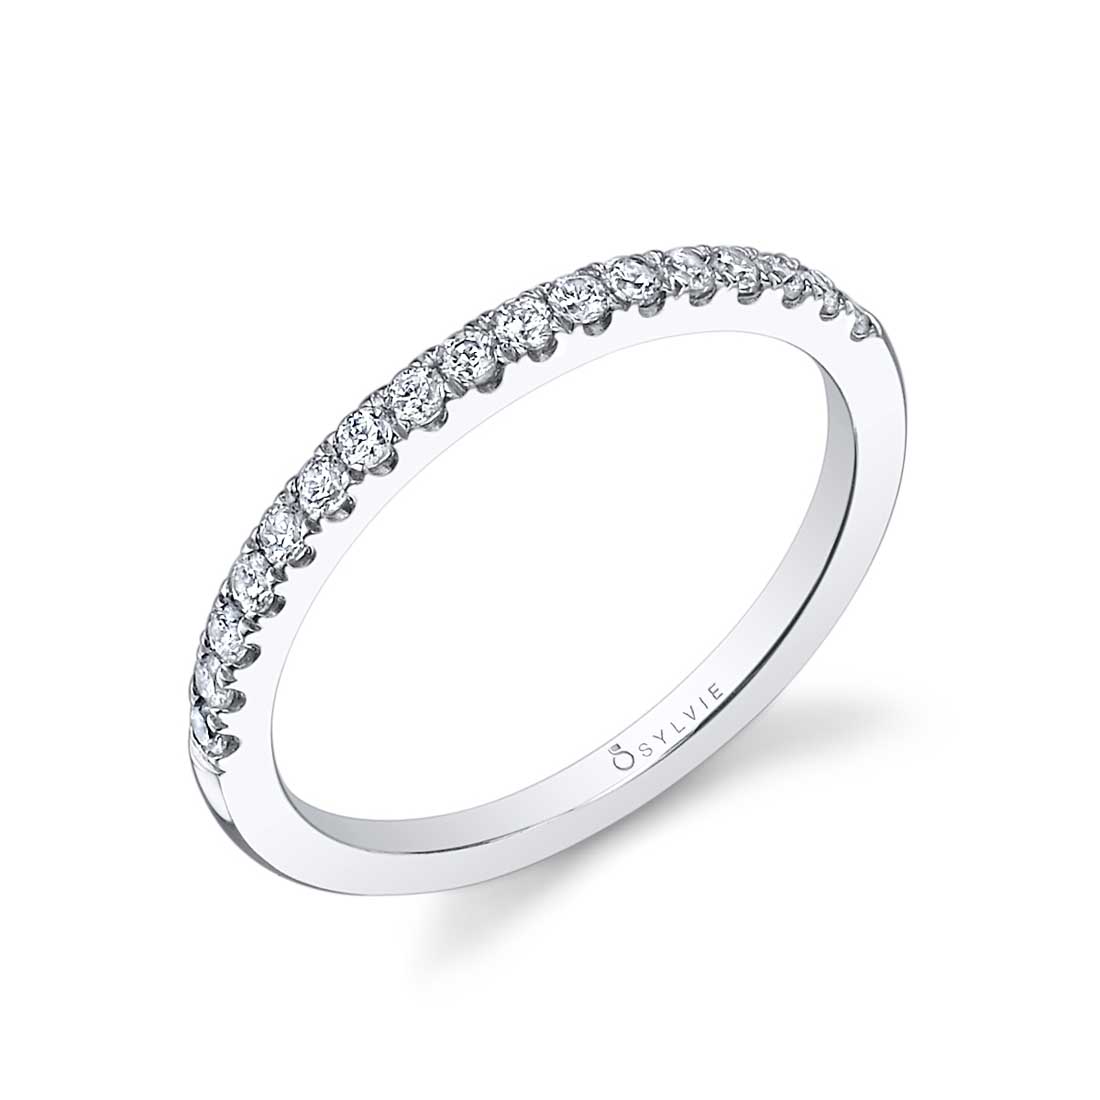 Profile Image of a Princess Cut Halo Engagement Ring With Halo